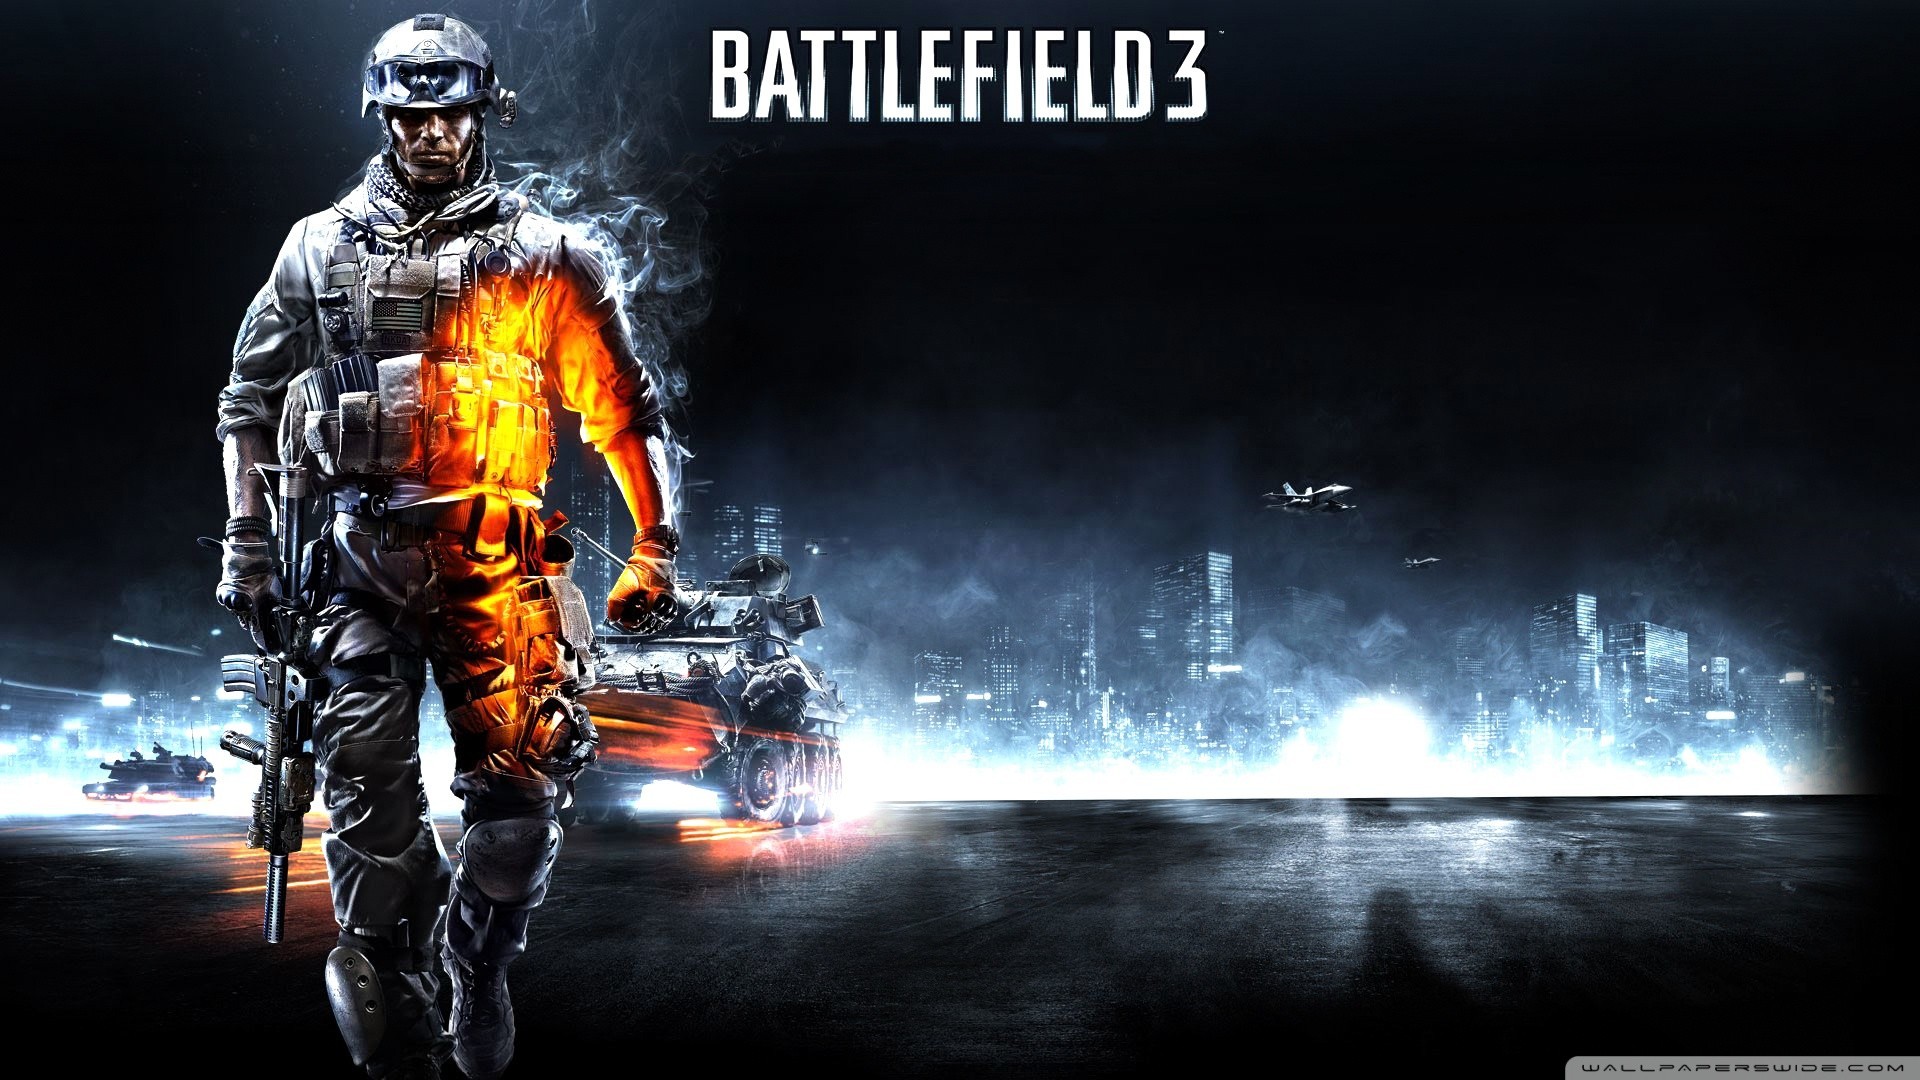 General 1920x1080 Battlefield 3 video games video game art PC gaming video game men soldier weapon